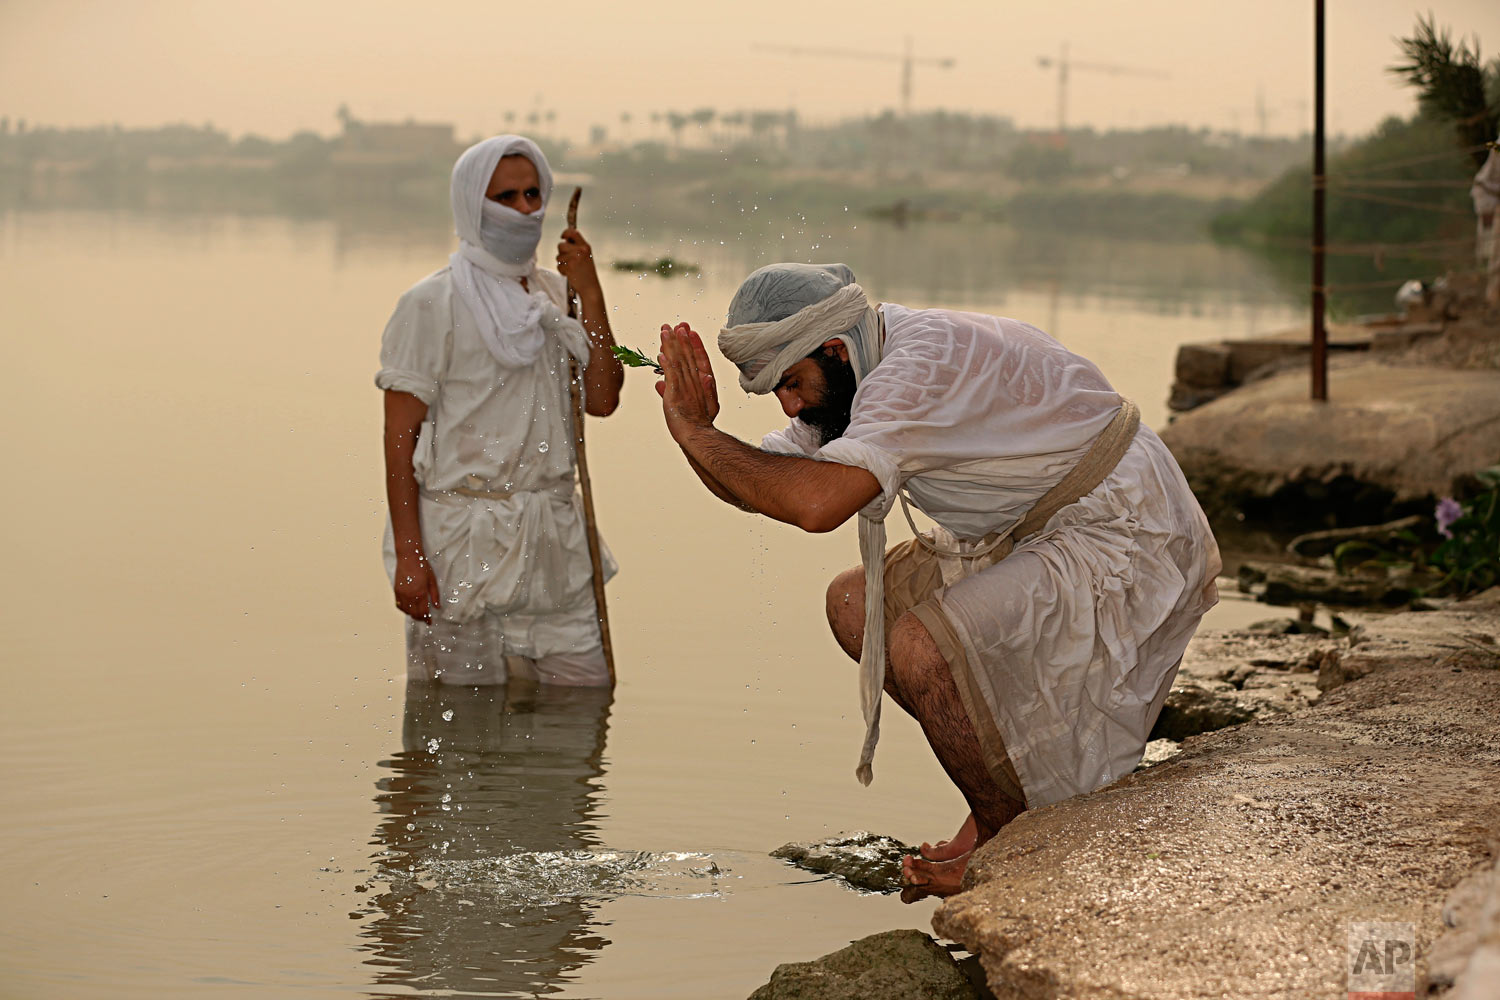  Followers of the ancient Mandaean religious sect perform their rituals along the strip of embankment of the Tigris River reserved for them, in Baghdad, Iraq, on Sunday, Oct. 14, 2018. Mandaeanism follows the teachings of John the Baptist, a saint in